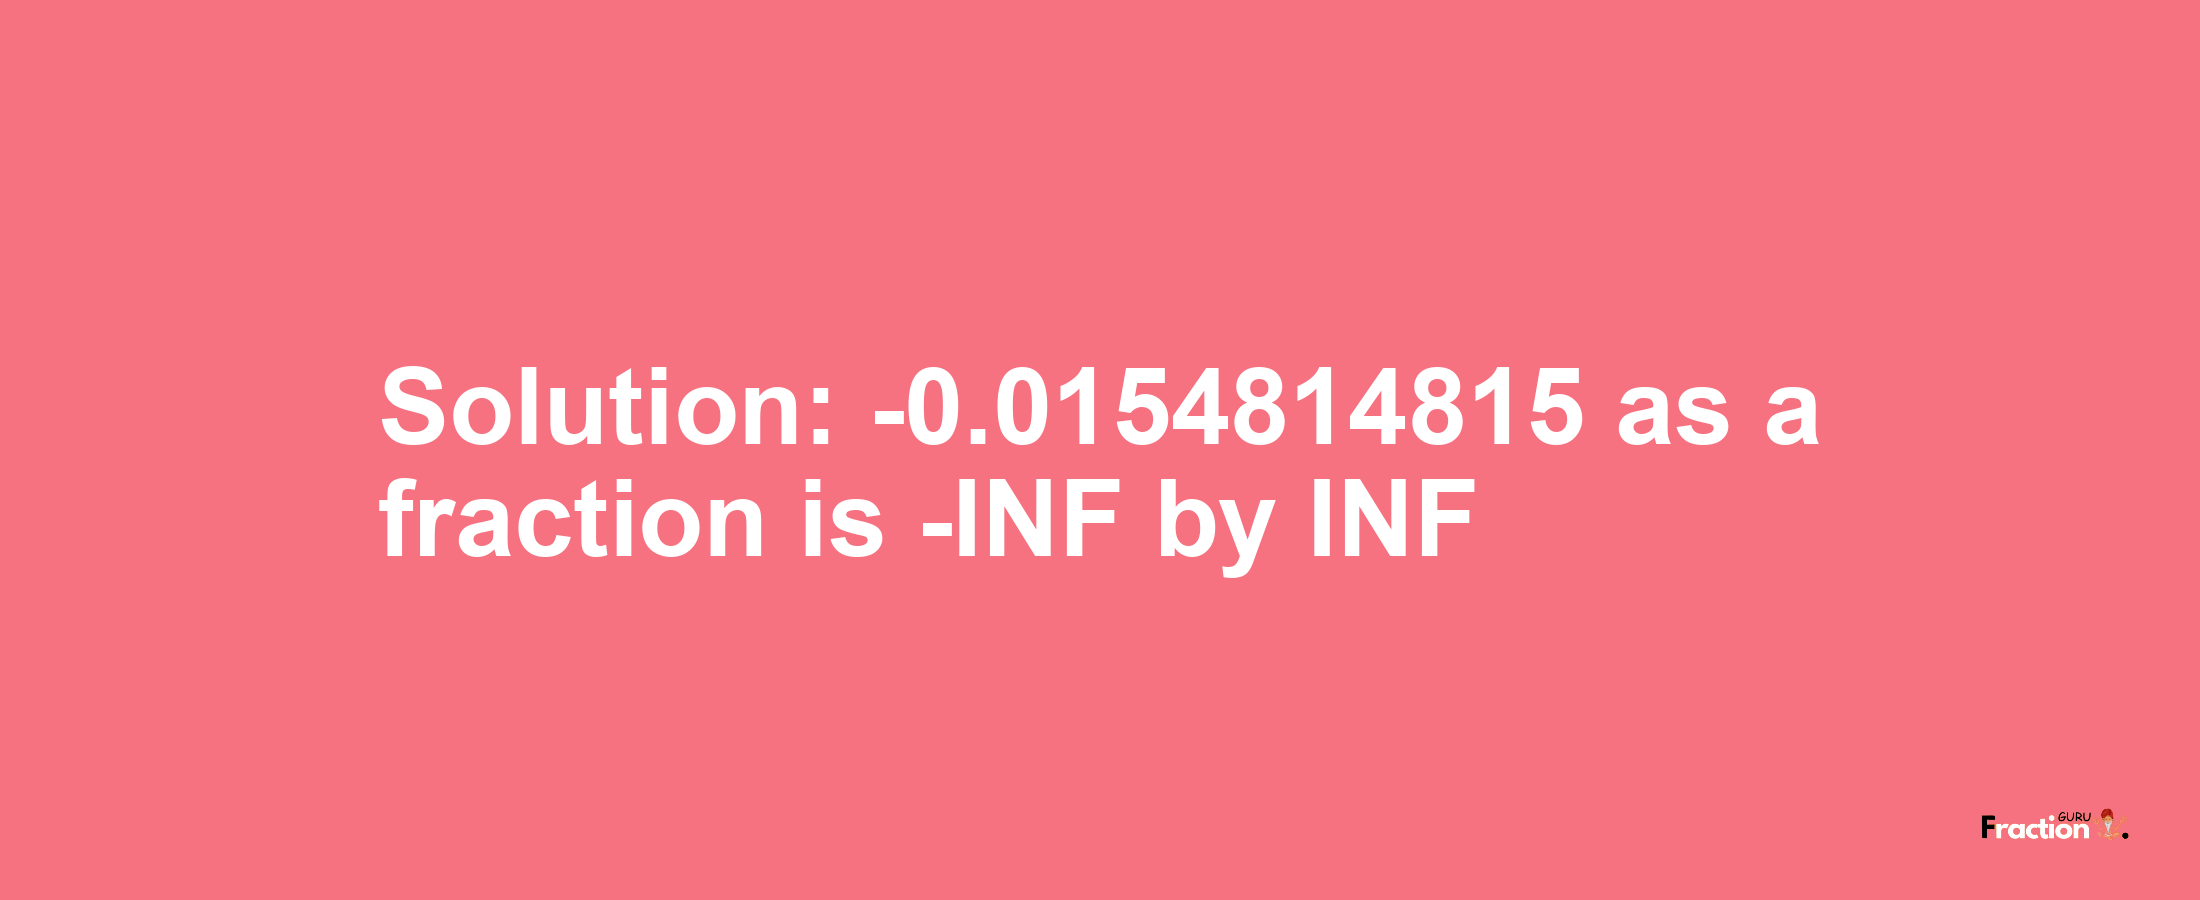 Solution:-0.0154814815 as a fraction is -INF/INF